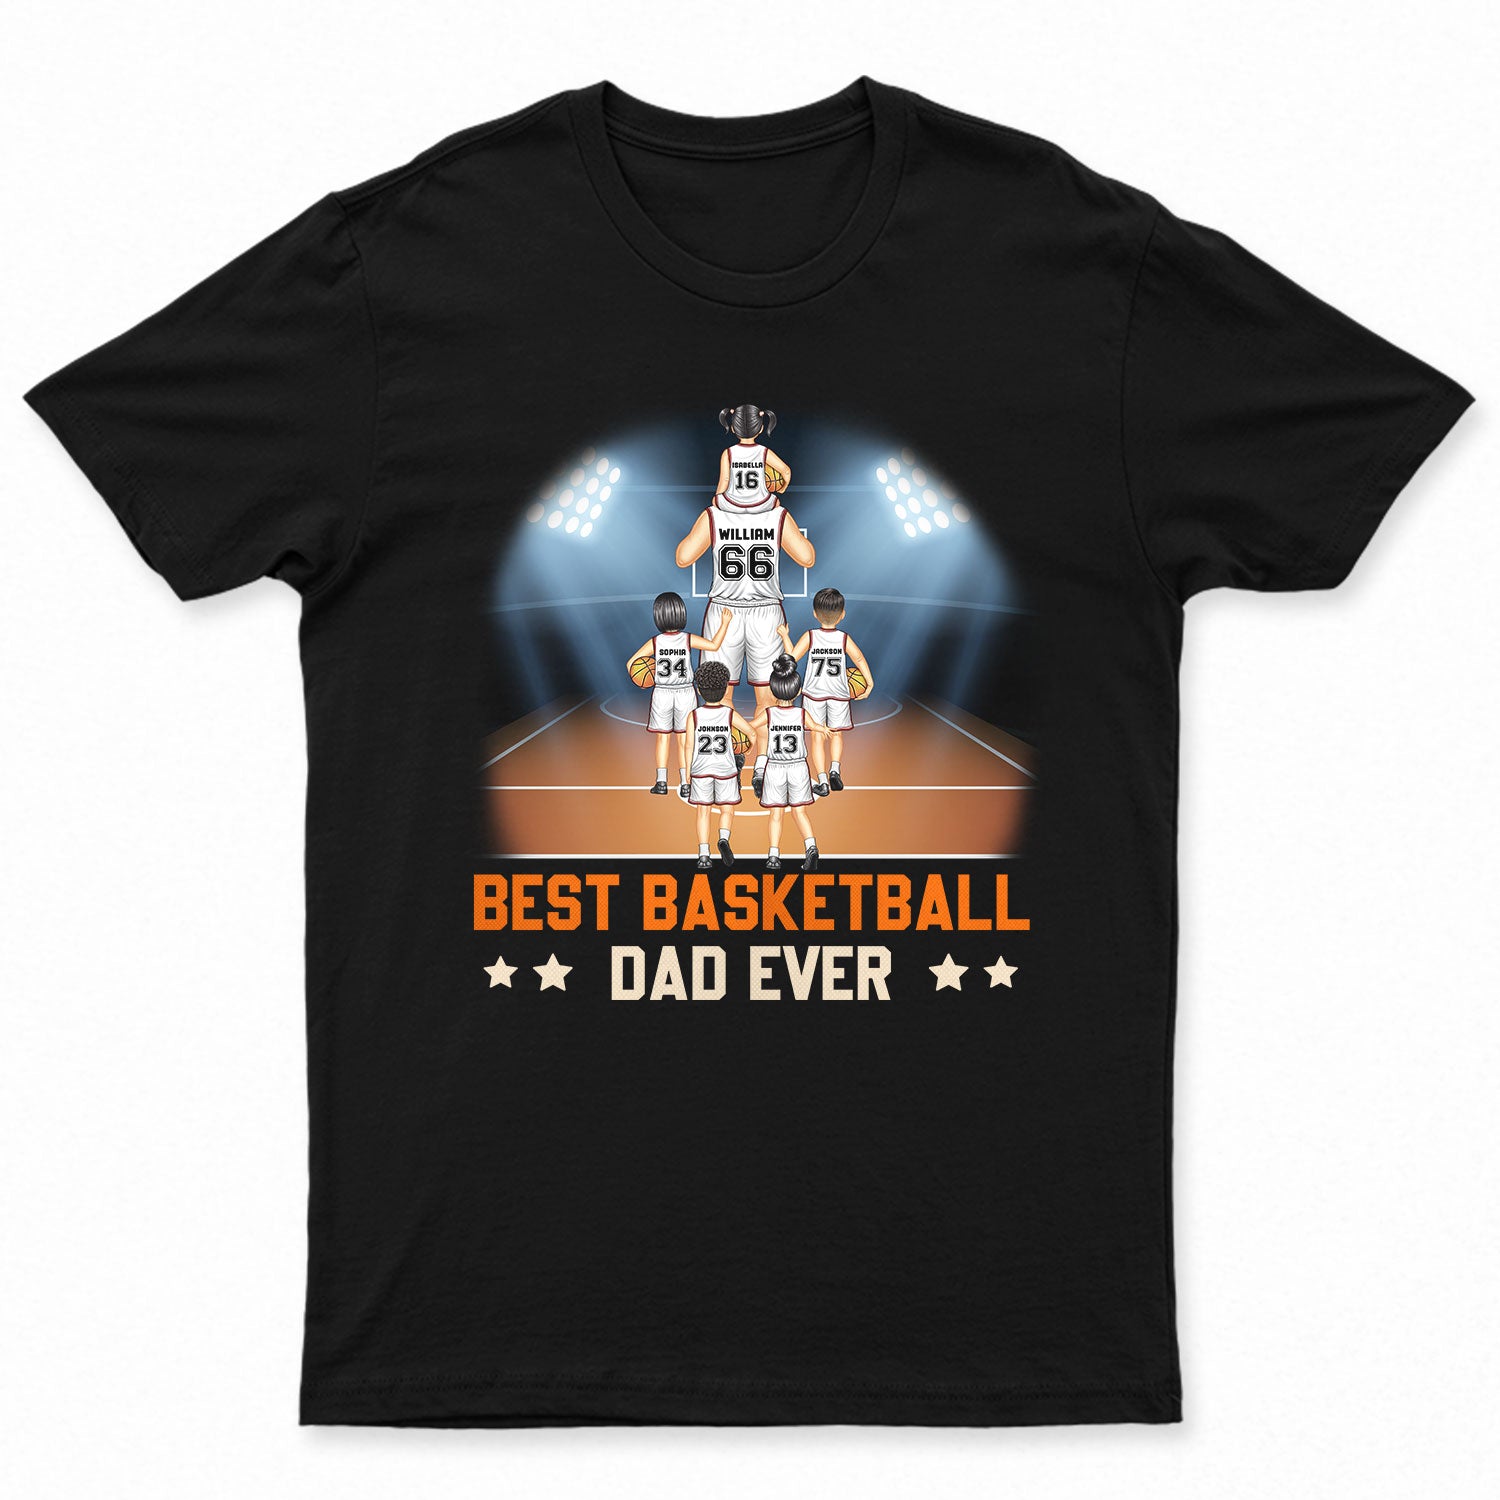 Best Basketball Dad Ever - Gift For Sport Dad, Basketball Dad, Father - Personalized T Shirt